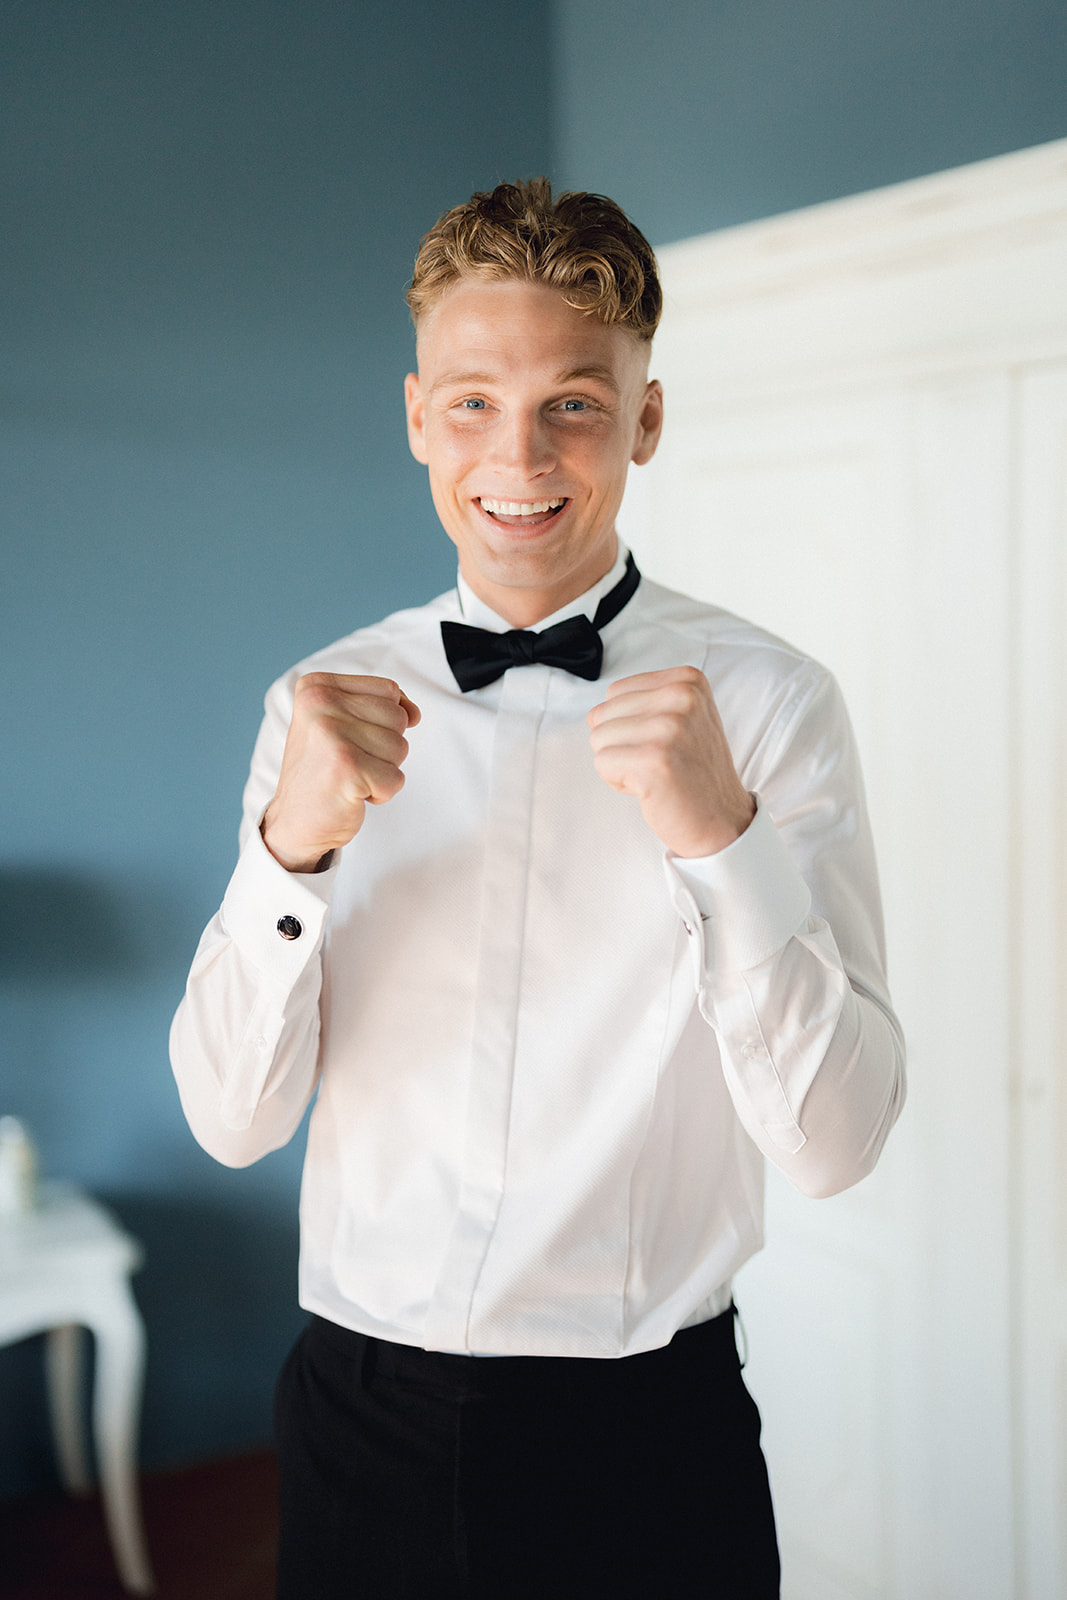 The groom in a shirt and bow tie, smiling